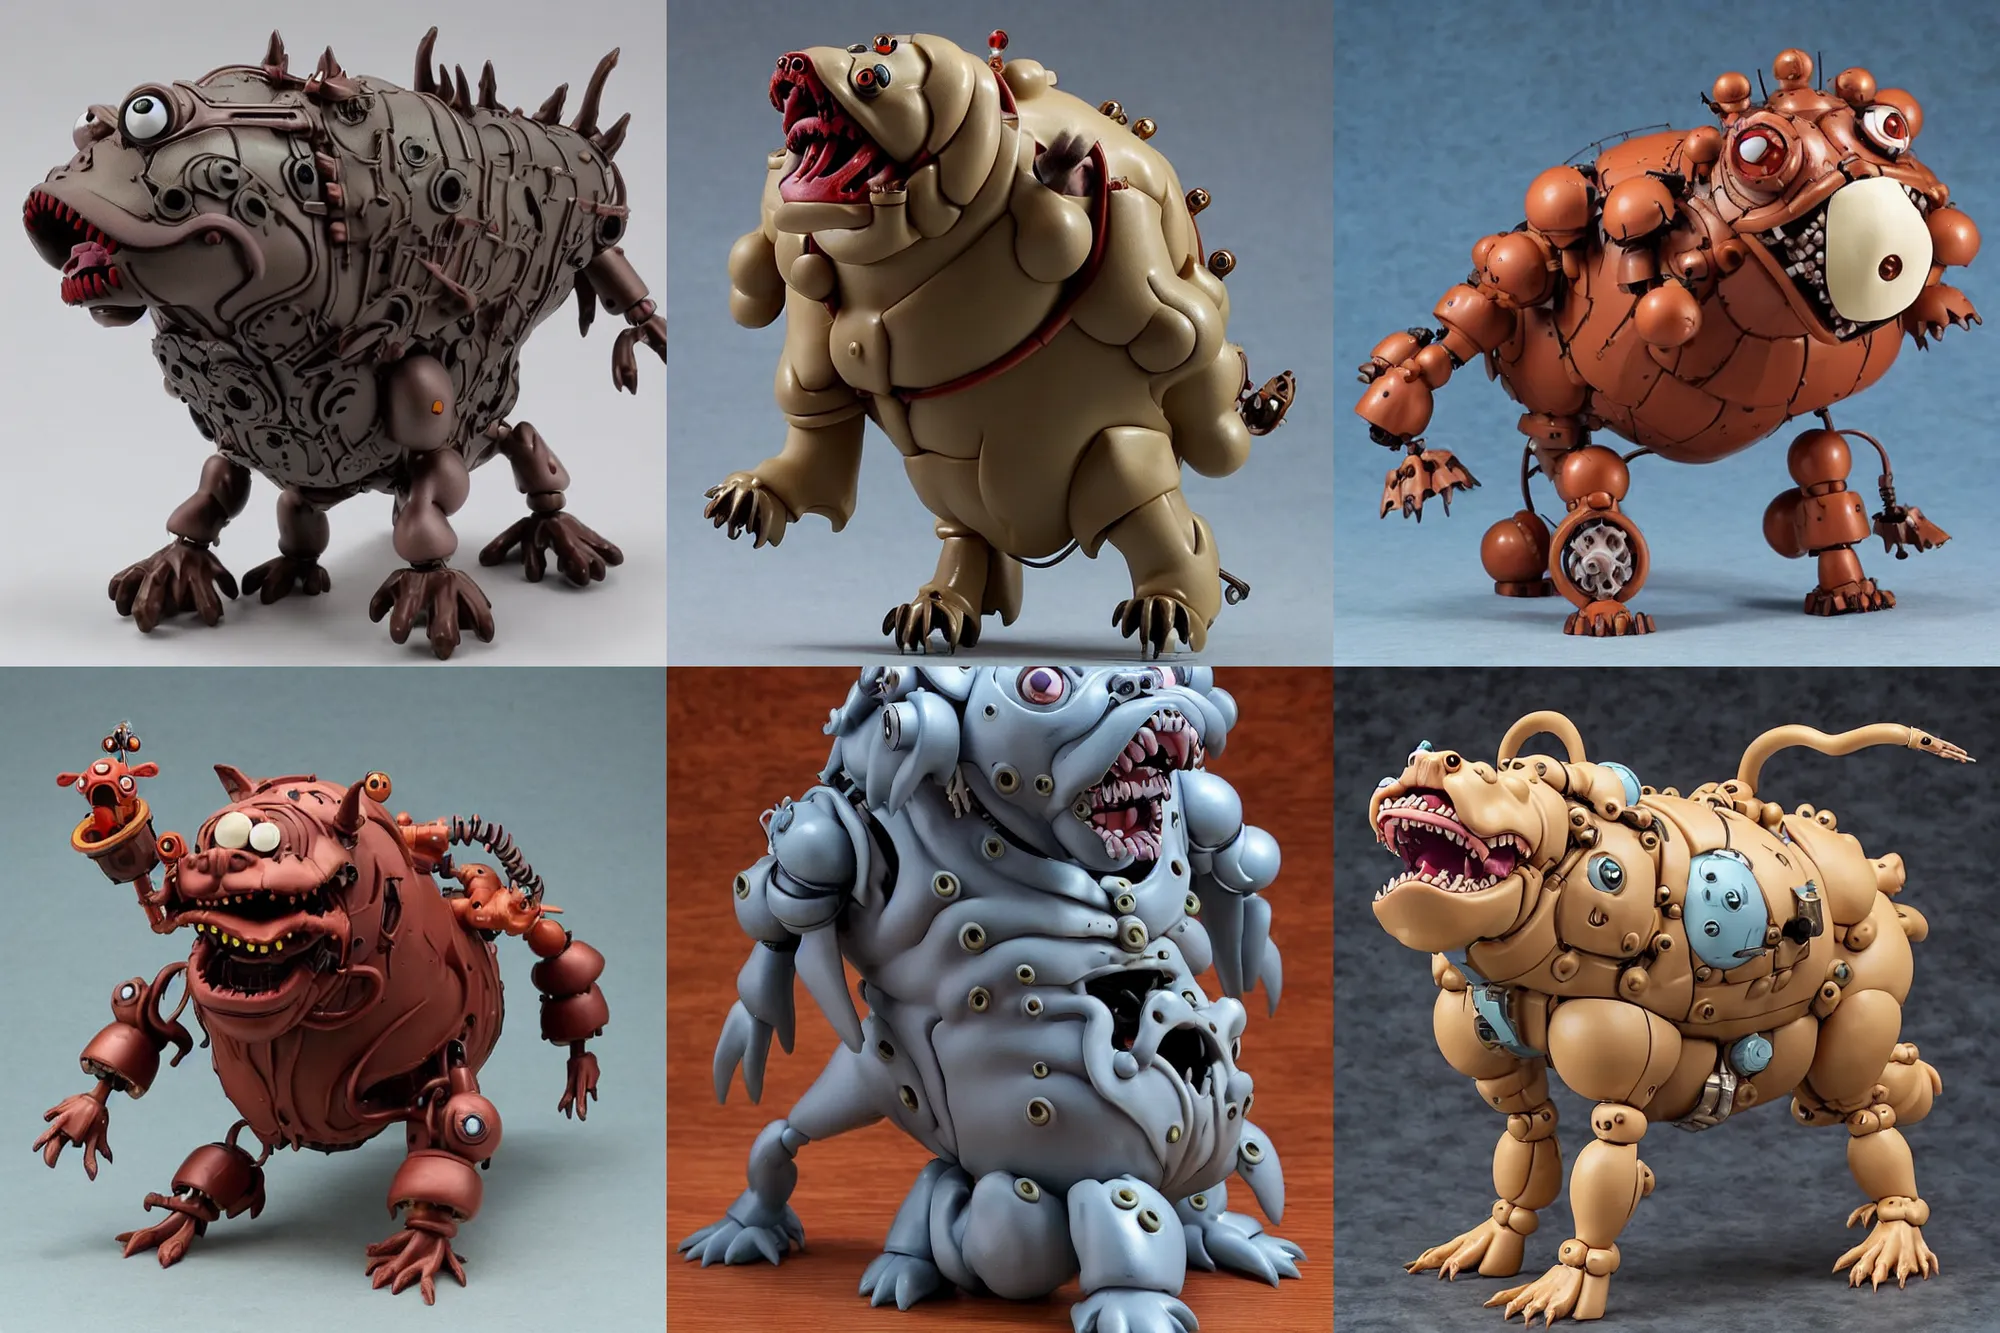 Prompt: A Lovecraftian scary giant mechanized adorable Bulldog from Studio Ghibli Howl's Moving Castle (2004) as a 1980's Kenner style action figure, 5 points of articulation, full body, 4k, highly detailed. award winning sci-fi. look at all that detail!